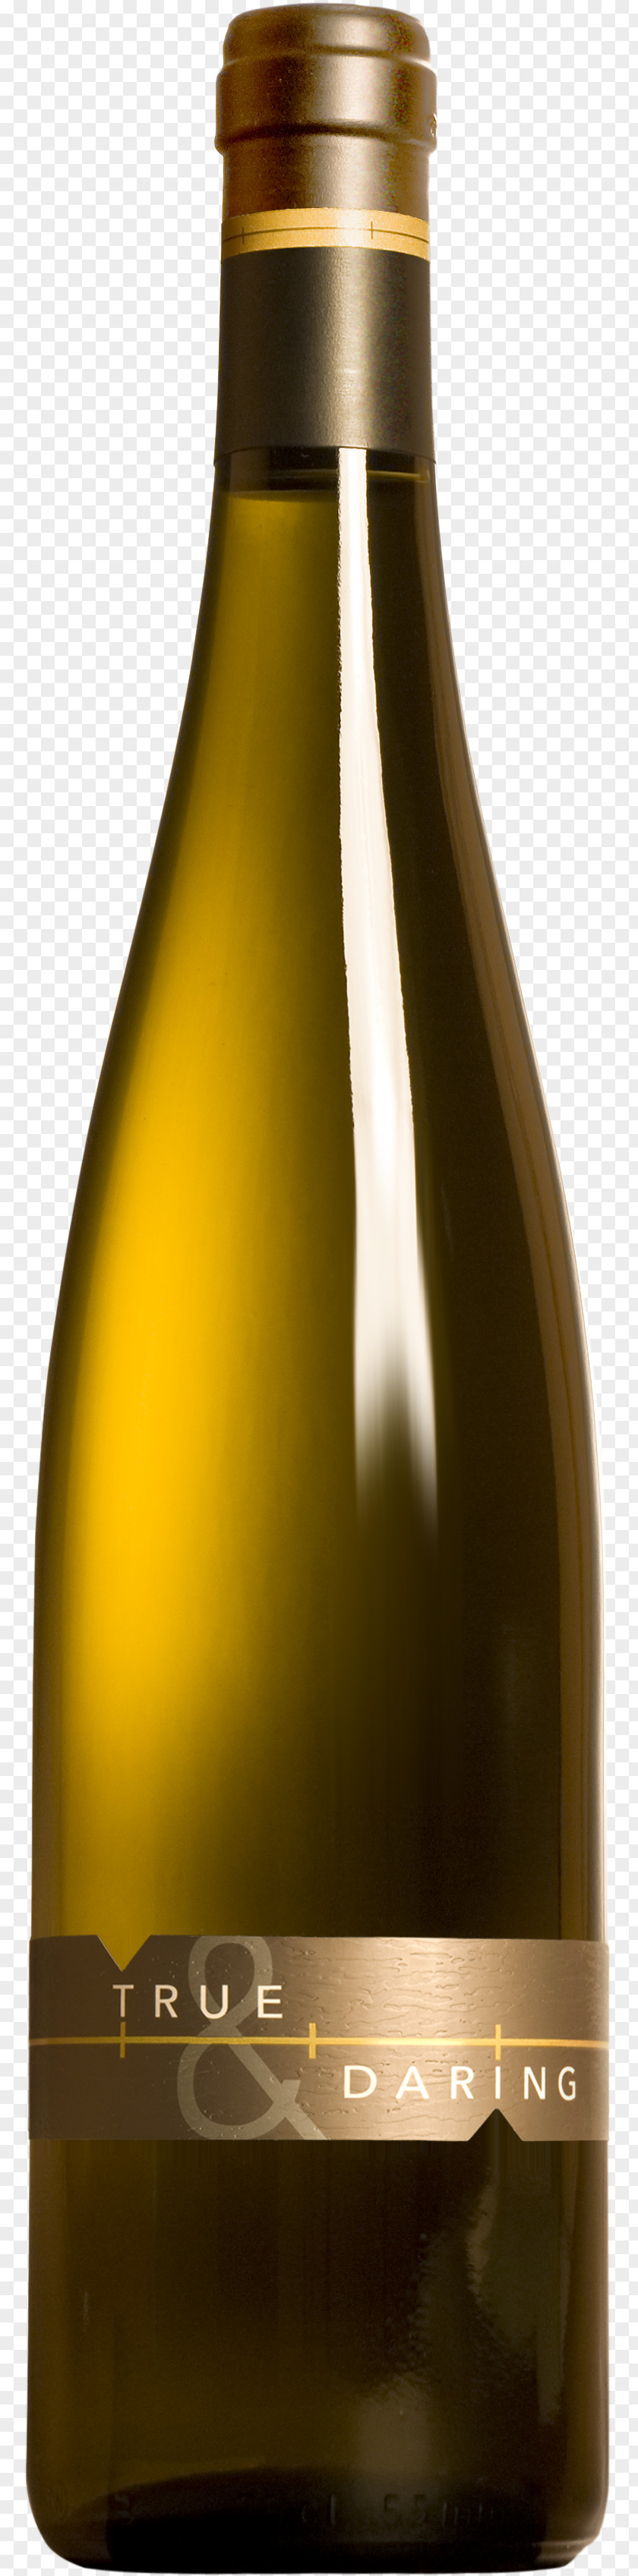 Wine Bottle Image Ice Riesling Kendall-Jackson Vineyard Estates Chateau Ste. Michelle PNG